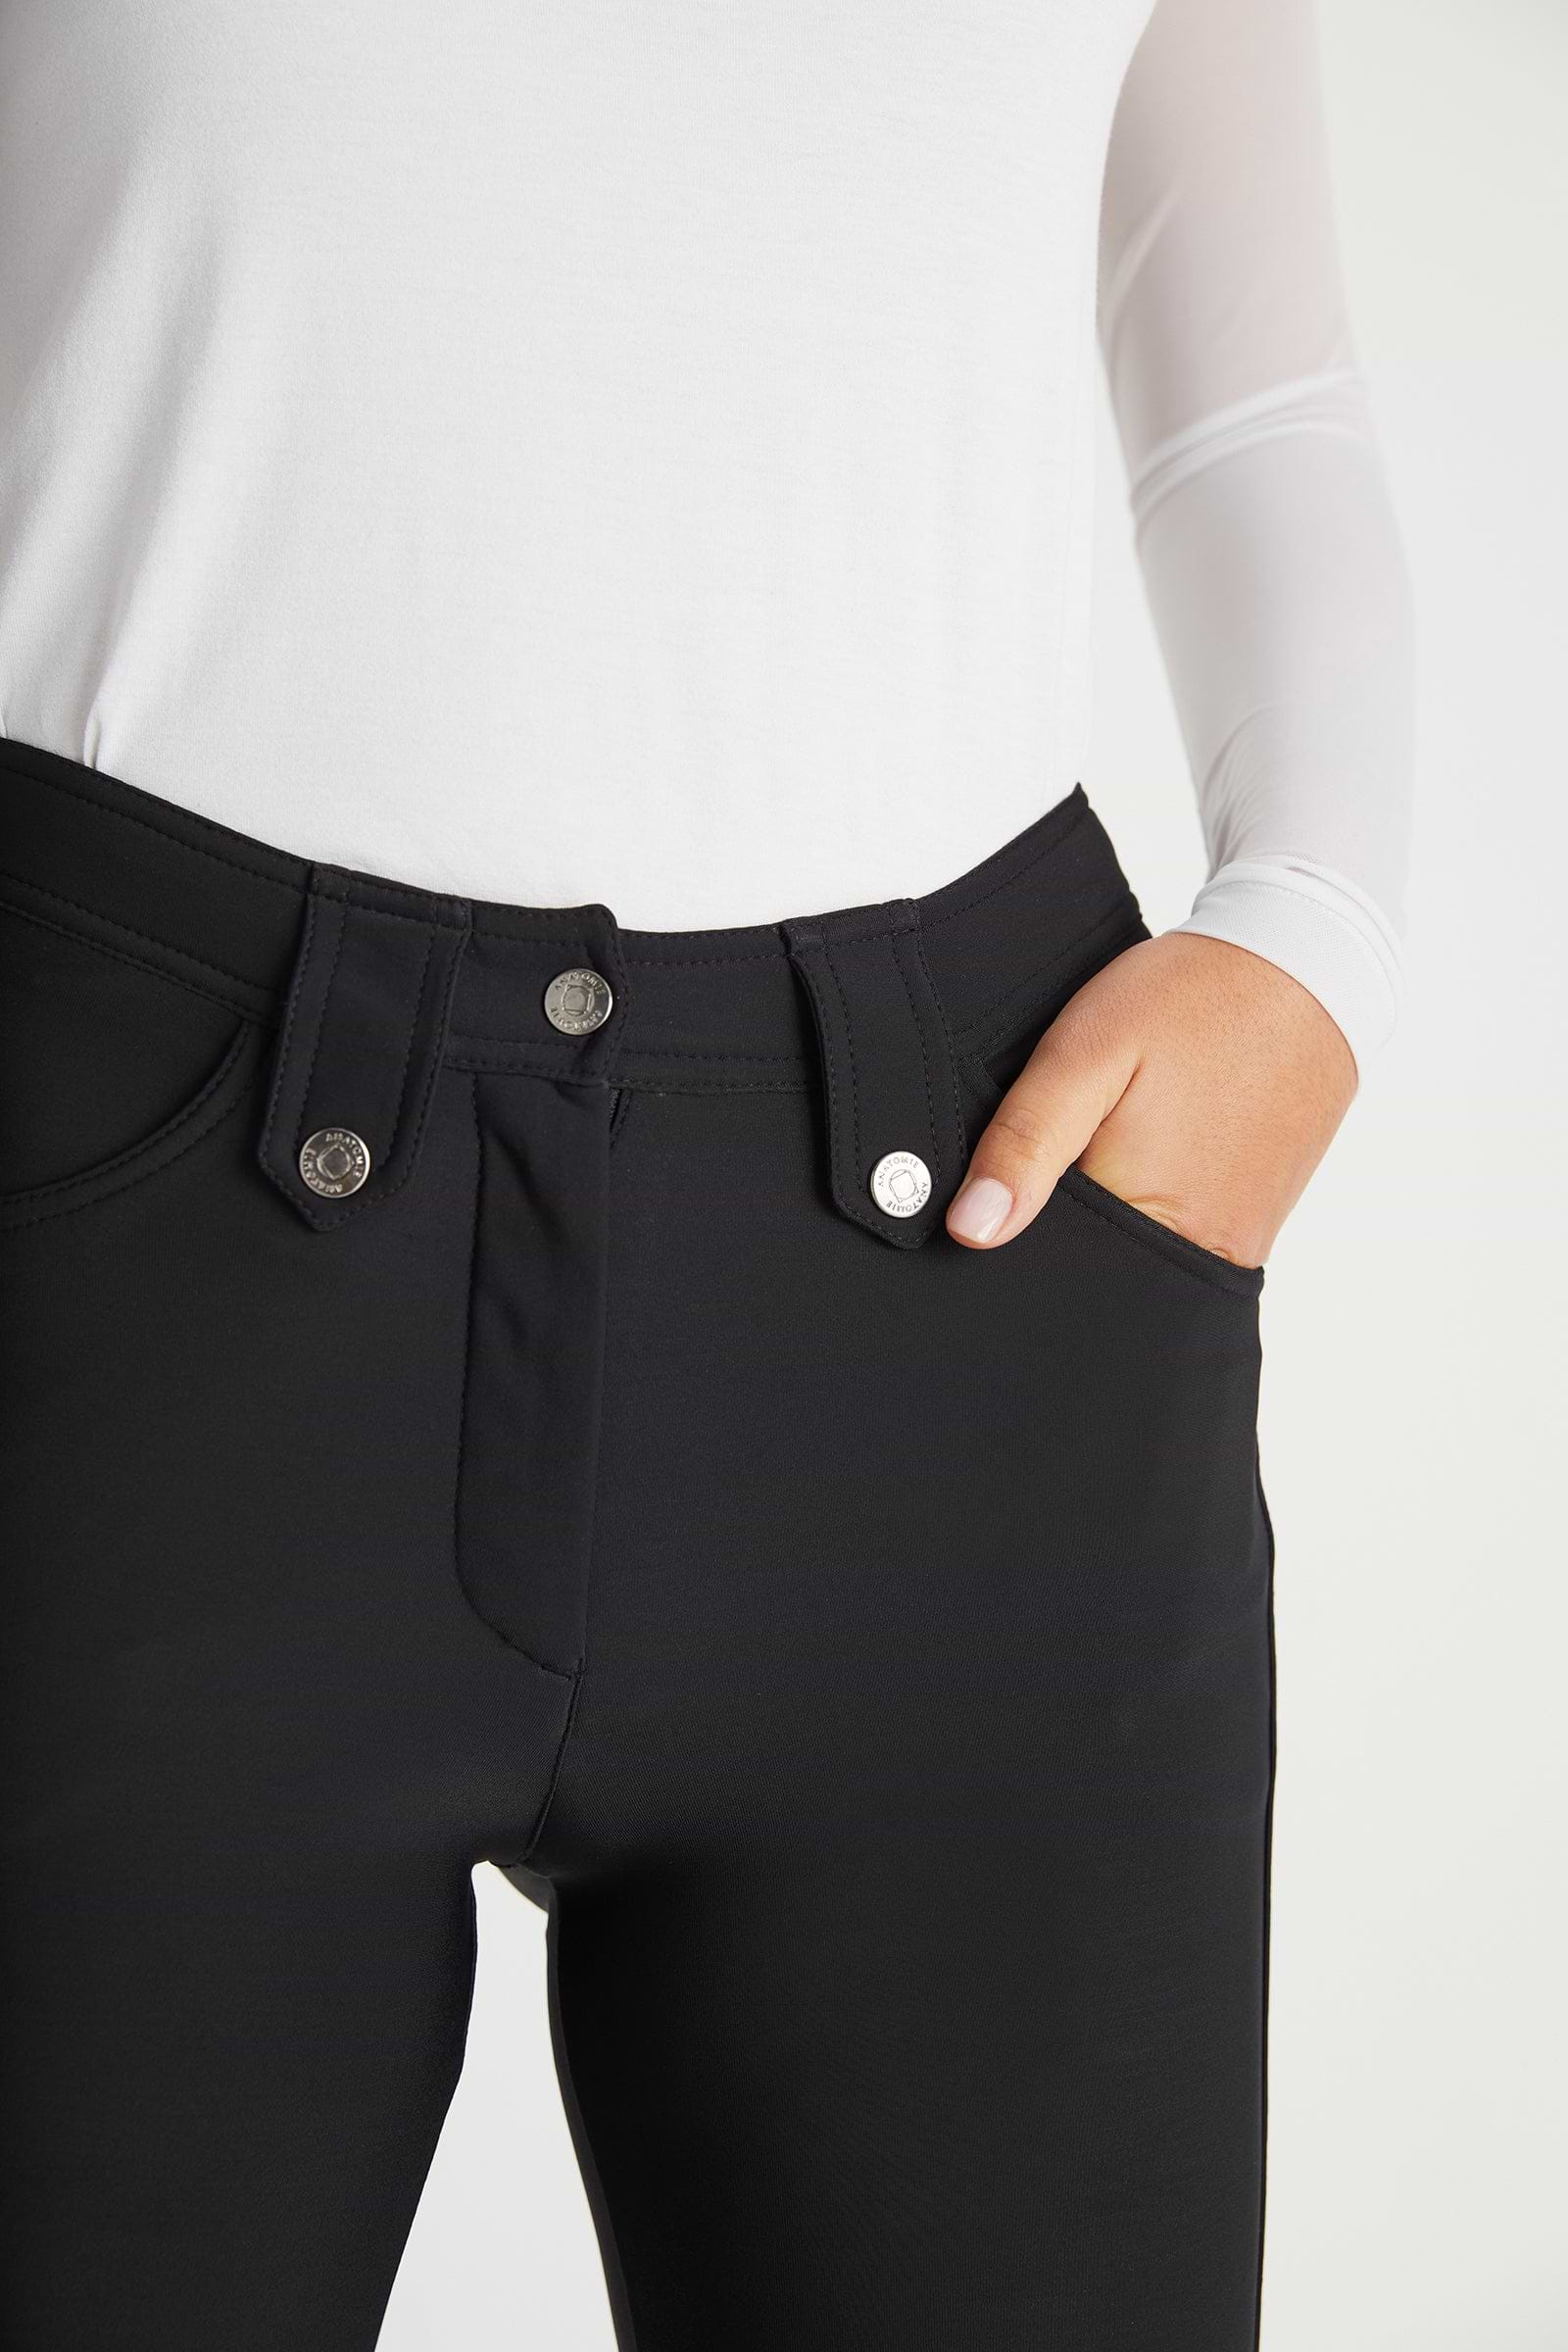 The Best Travel Pants. Front Pockets of the Skyler Cozy Fleece-Lined Travel Pant in Black